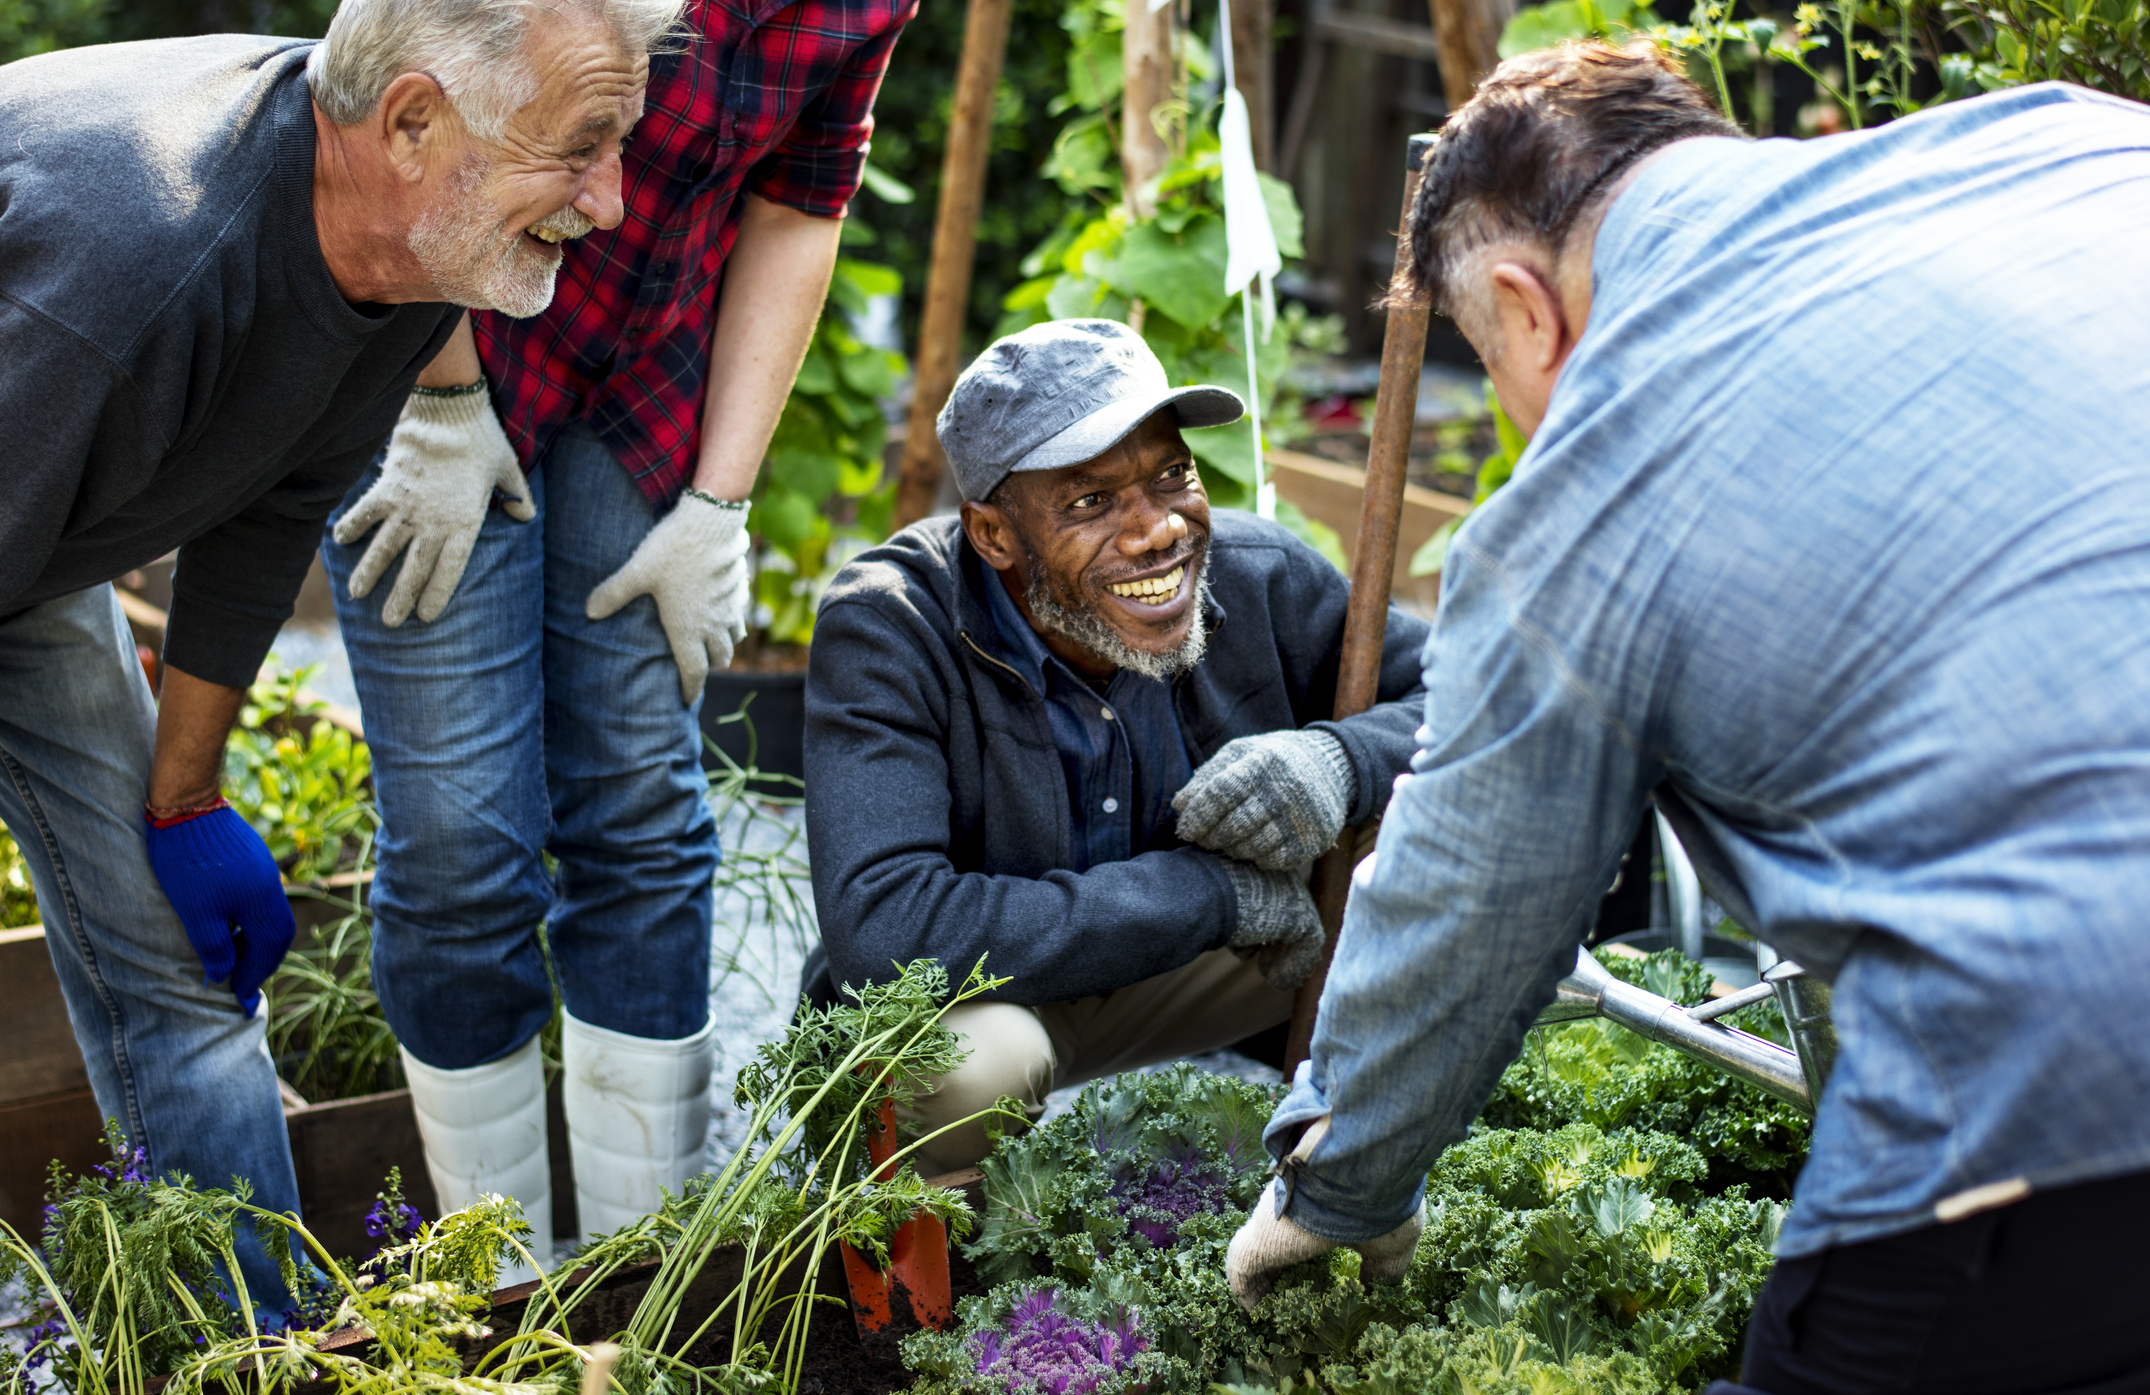 A group of senior men tending to a garden – one of the senior living amenities in their community.